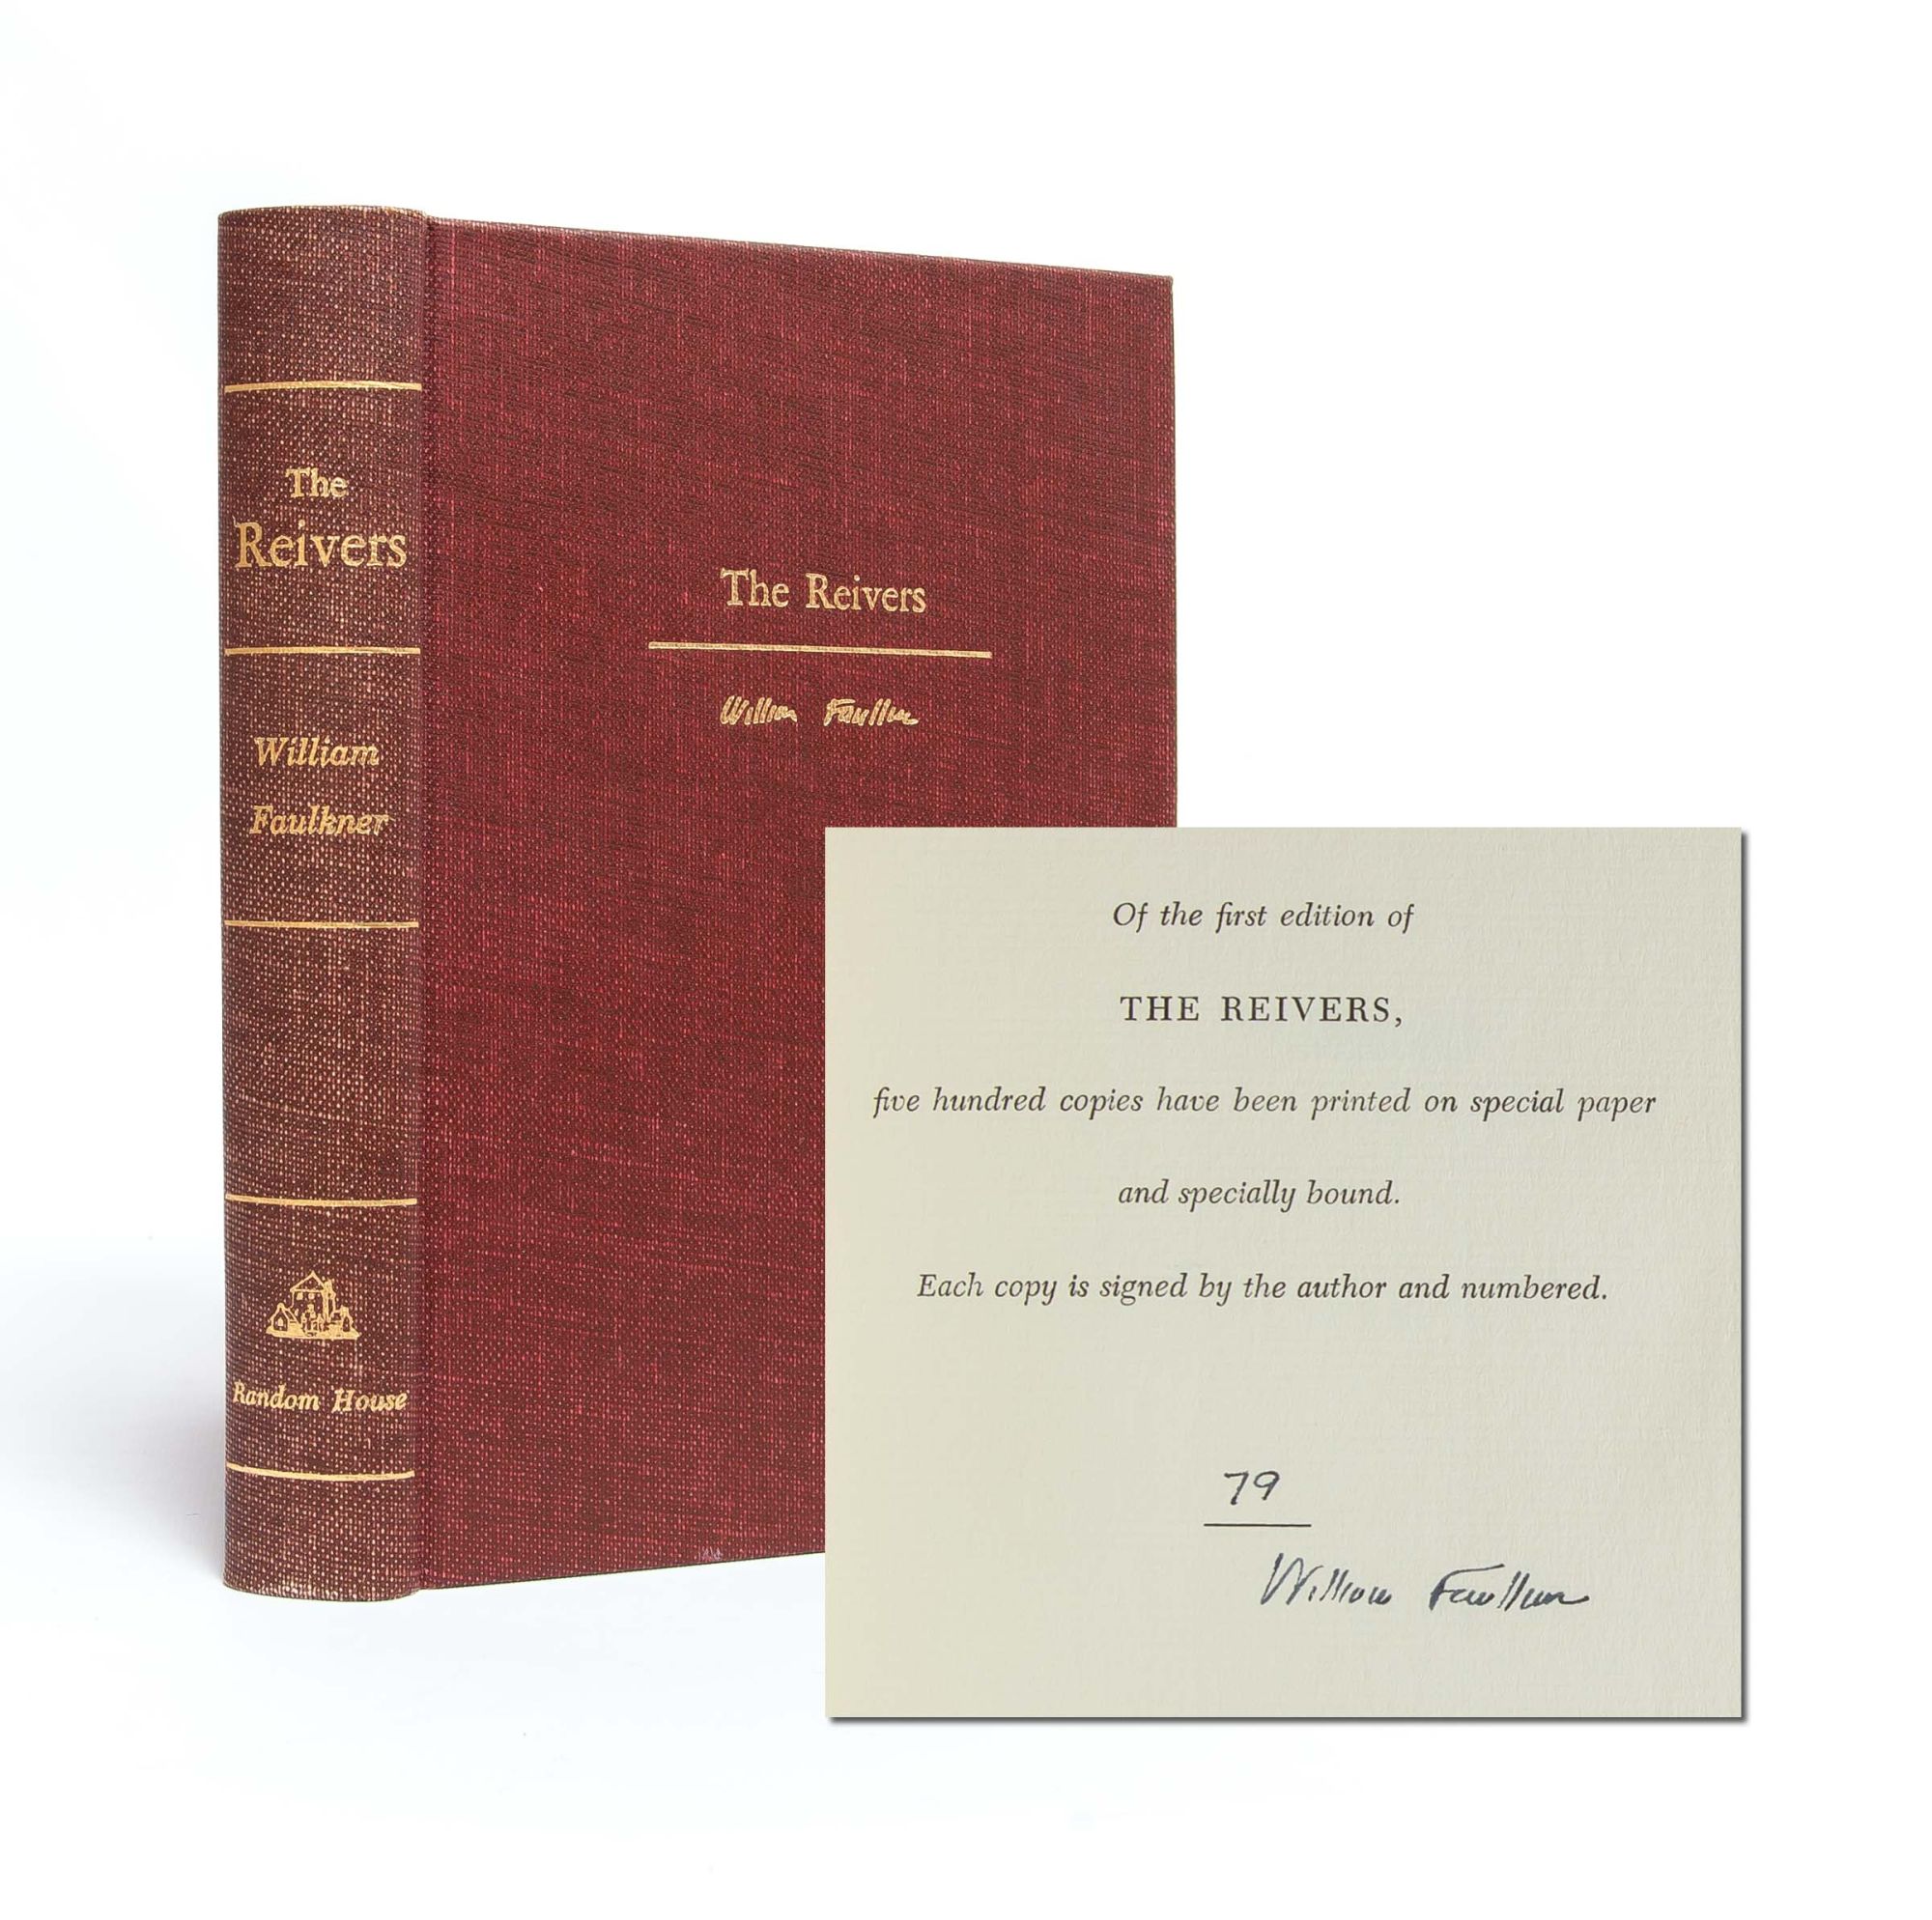 (Item #5276) The Reivers (Signed limited edition). William Faulkner.